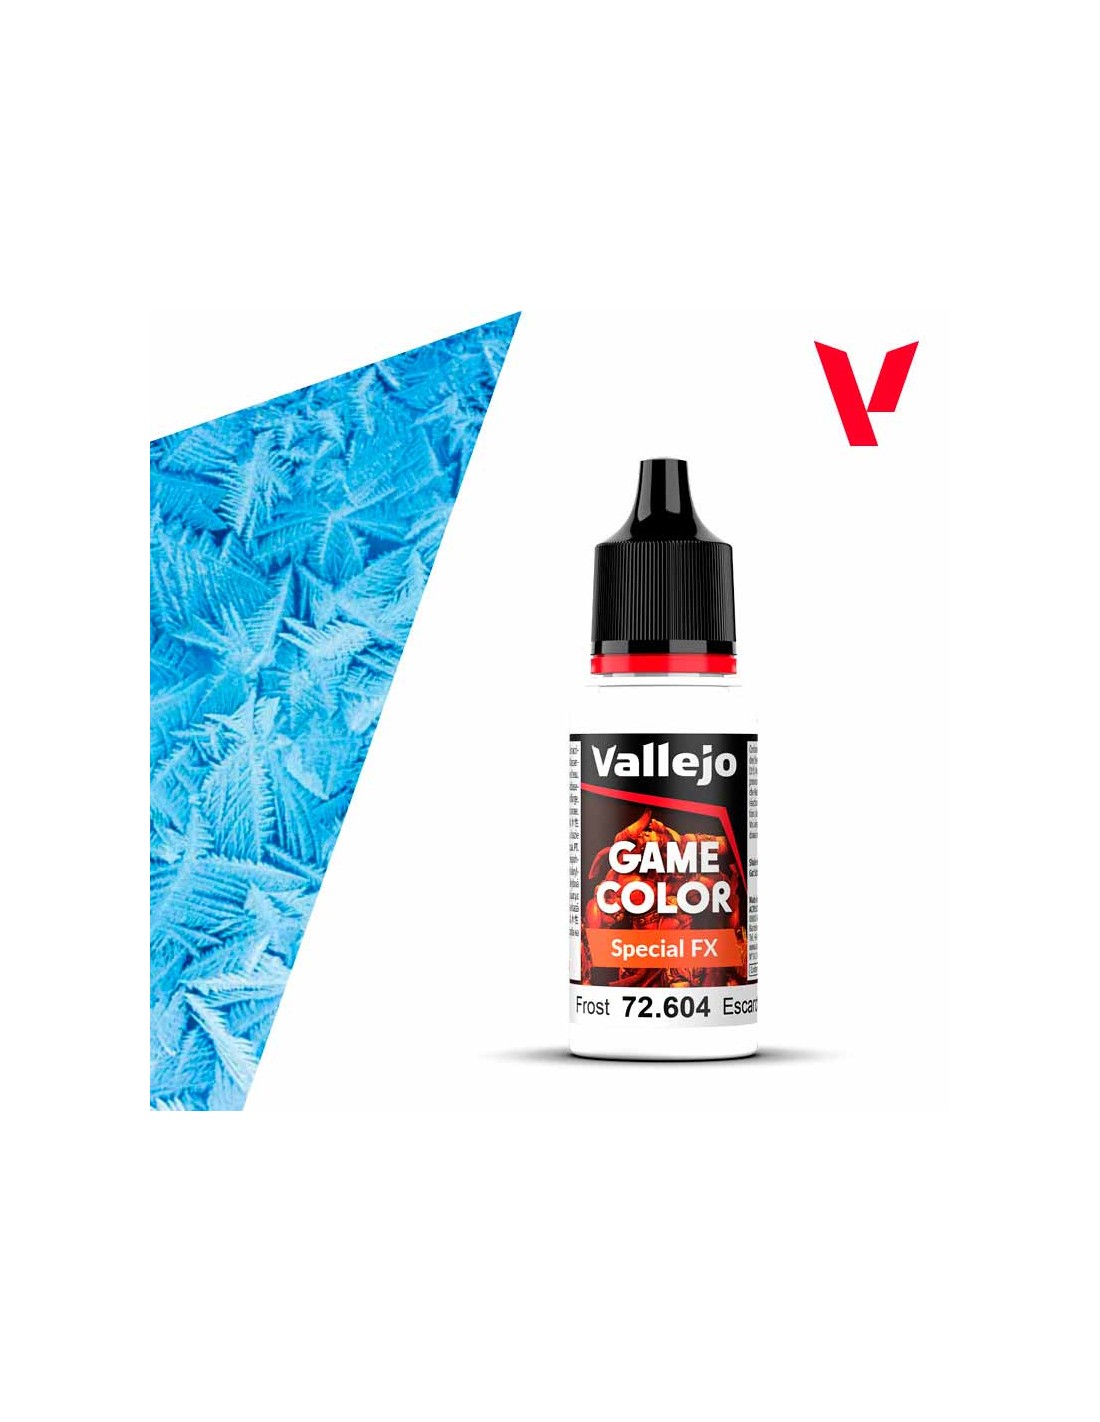 Vallejo Game Color Special FX - Frost